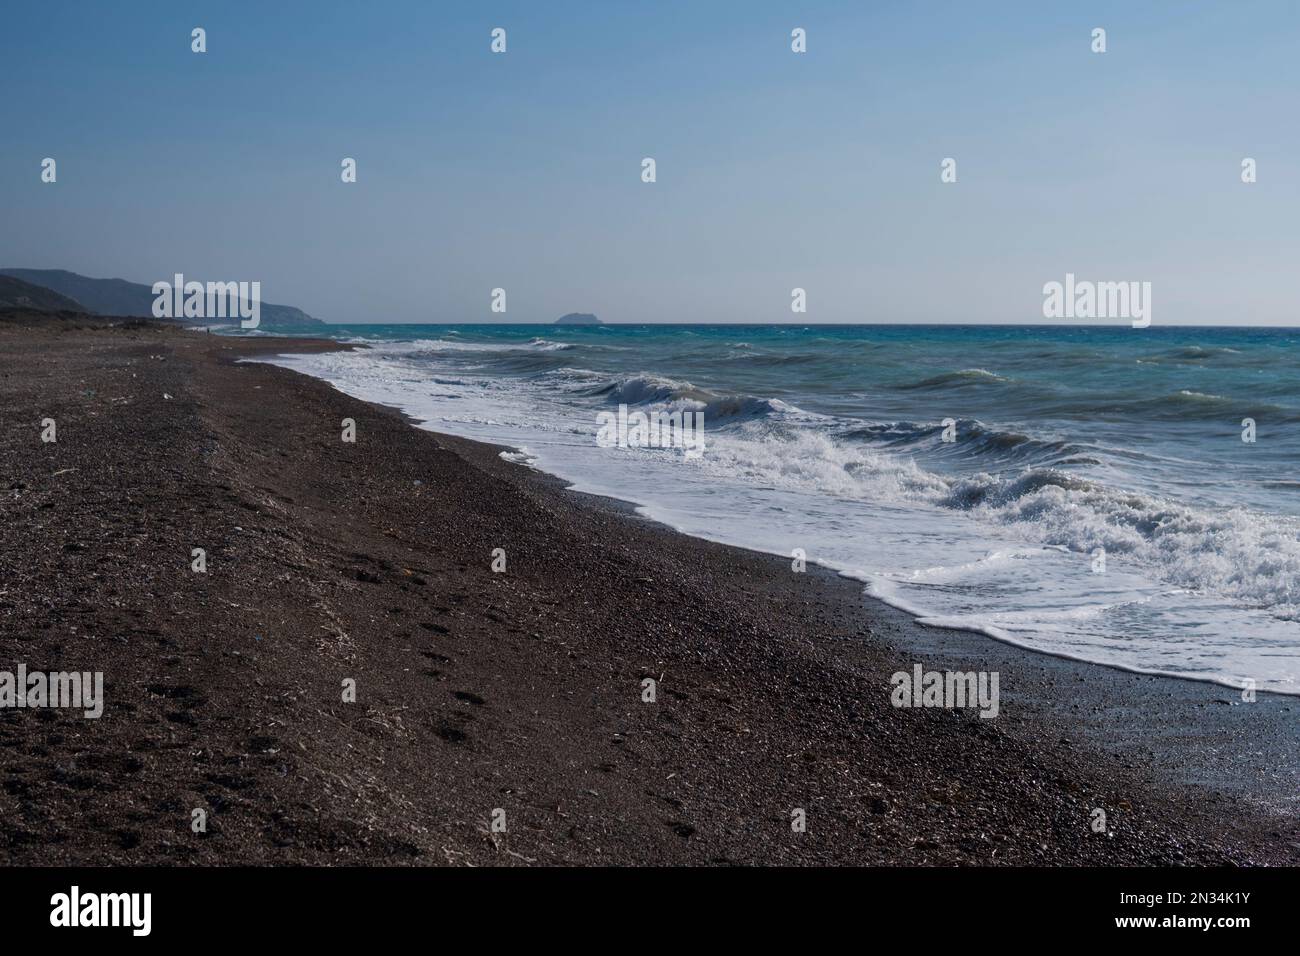 Landscape of an east shore of Rhodes Island in Greece with rocky beach and big waves Stock Photo